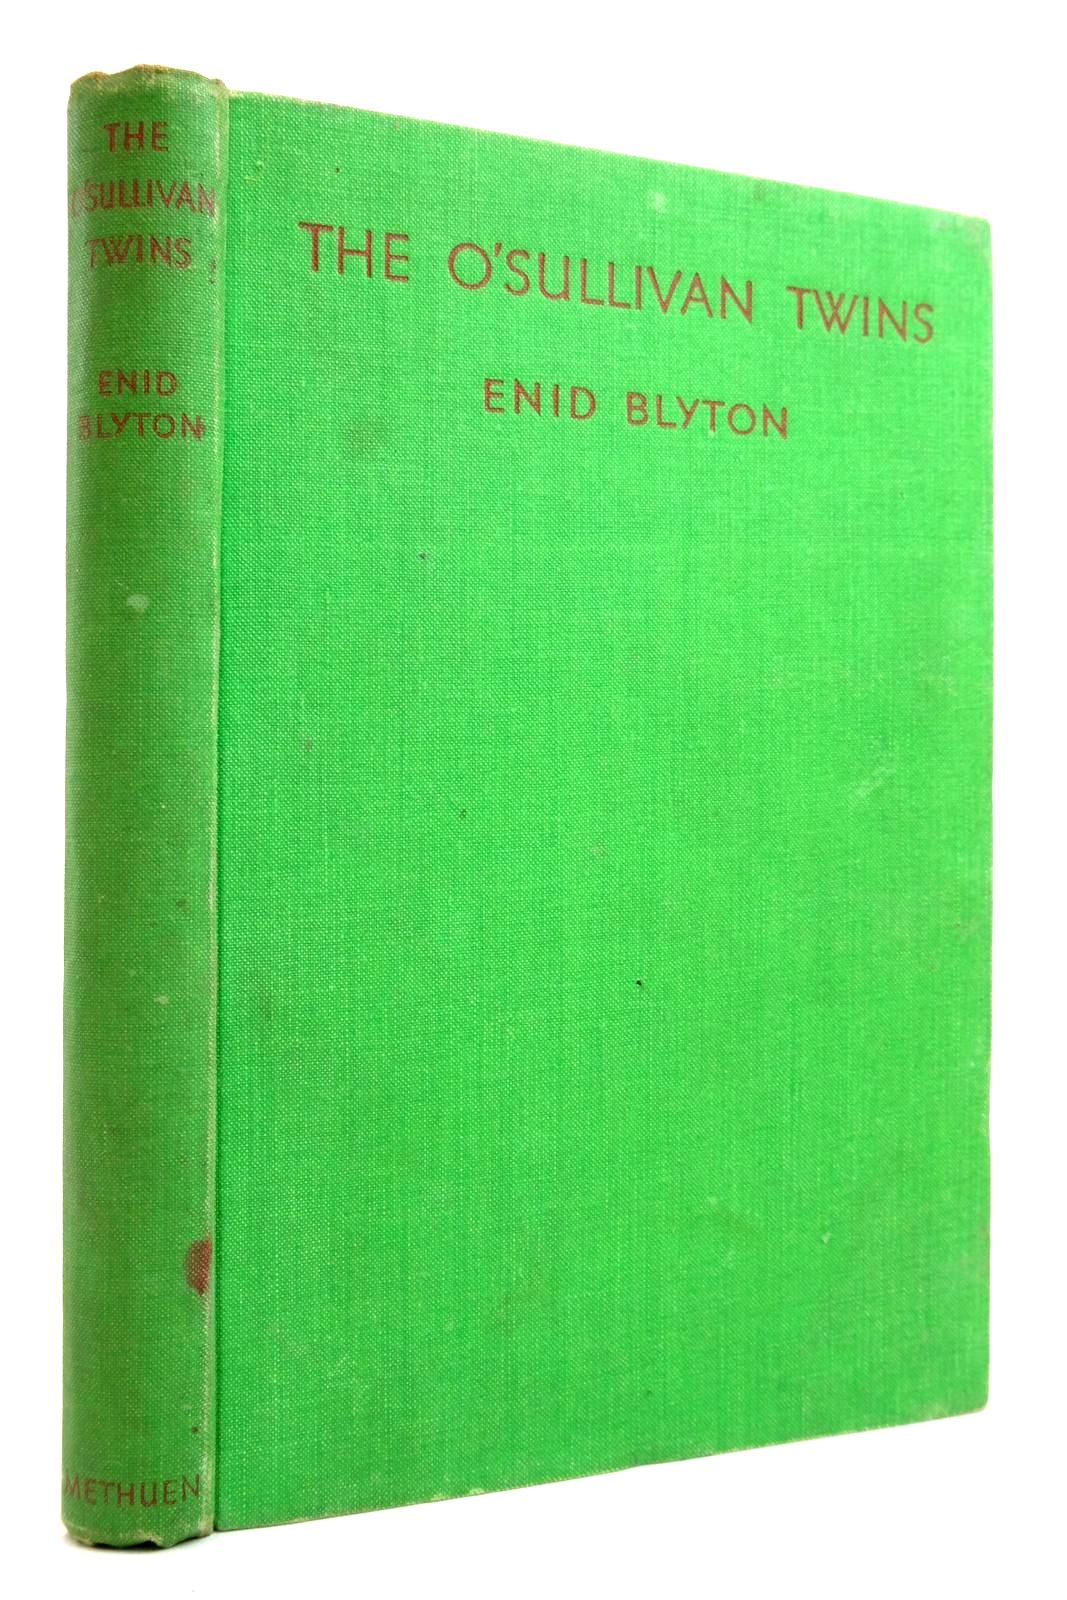 Photo of THE O'SULLIVAN TWINS written by Blyton, Enid illustrated by Cable, W. Lindsay published by Methuen & Co. Ltd. (STOCK CODE: 2135774)  for sale by Stella & Rose's Books